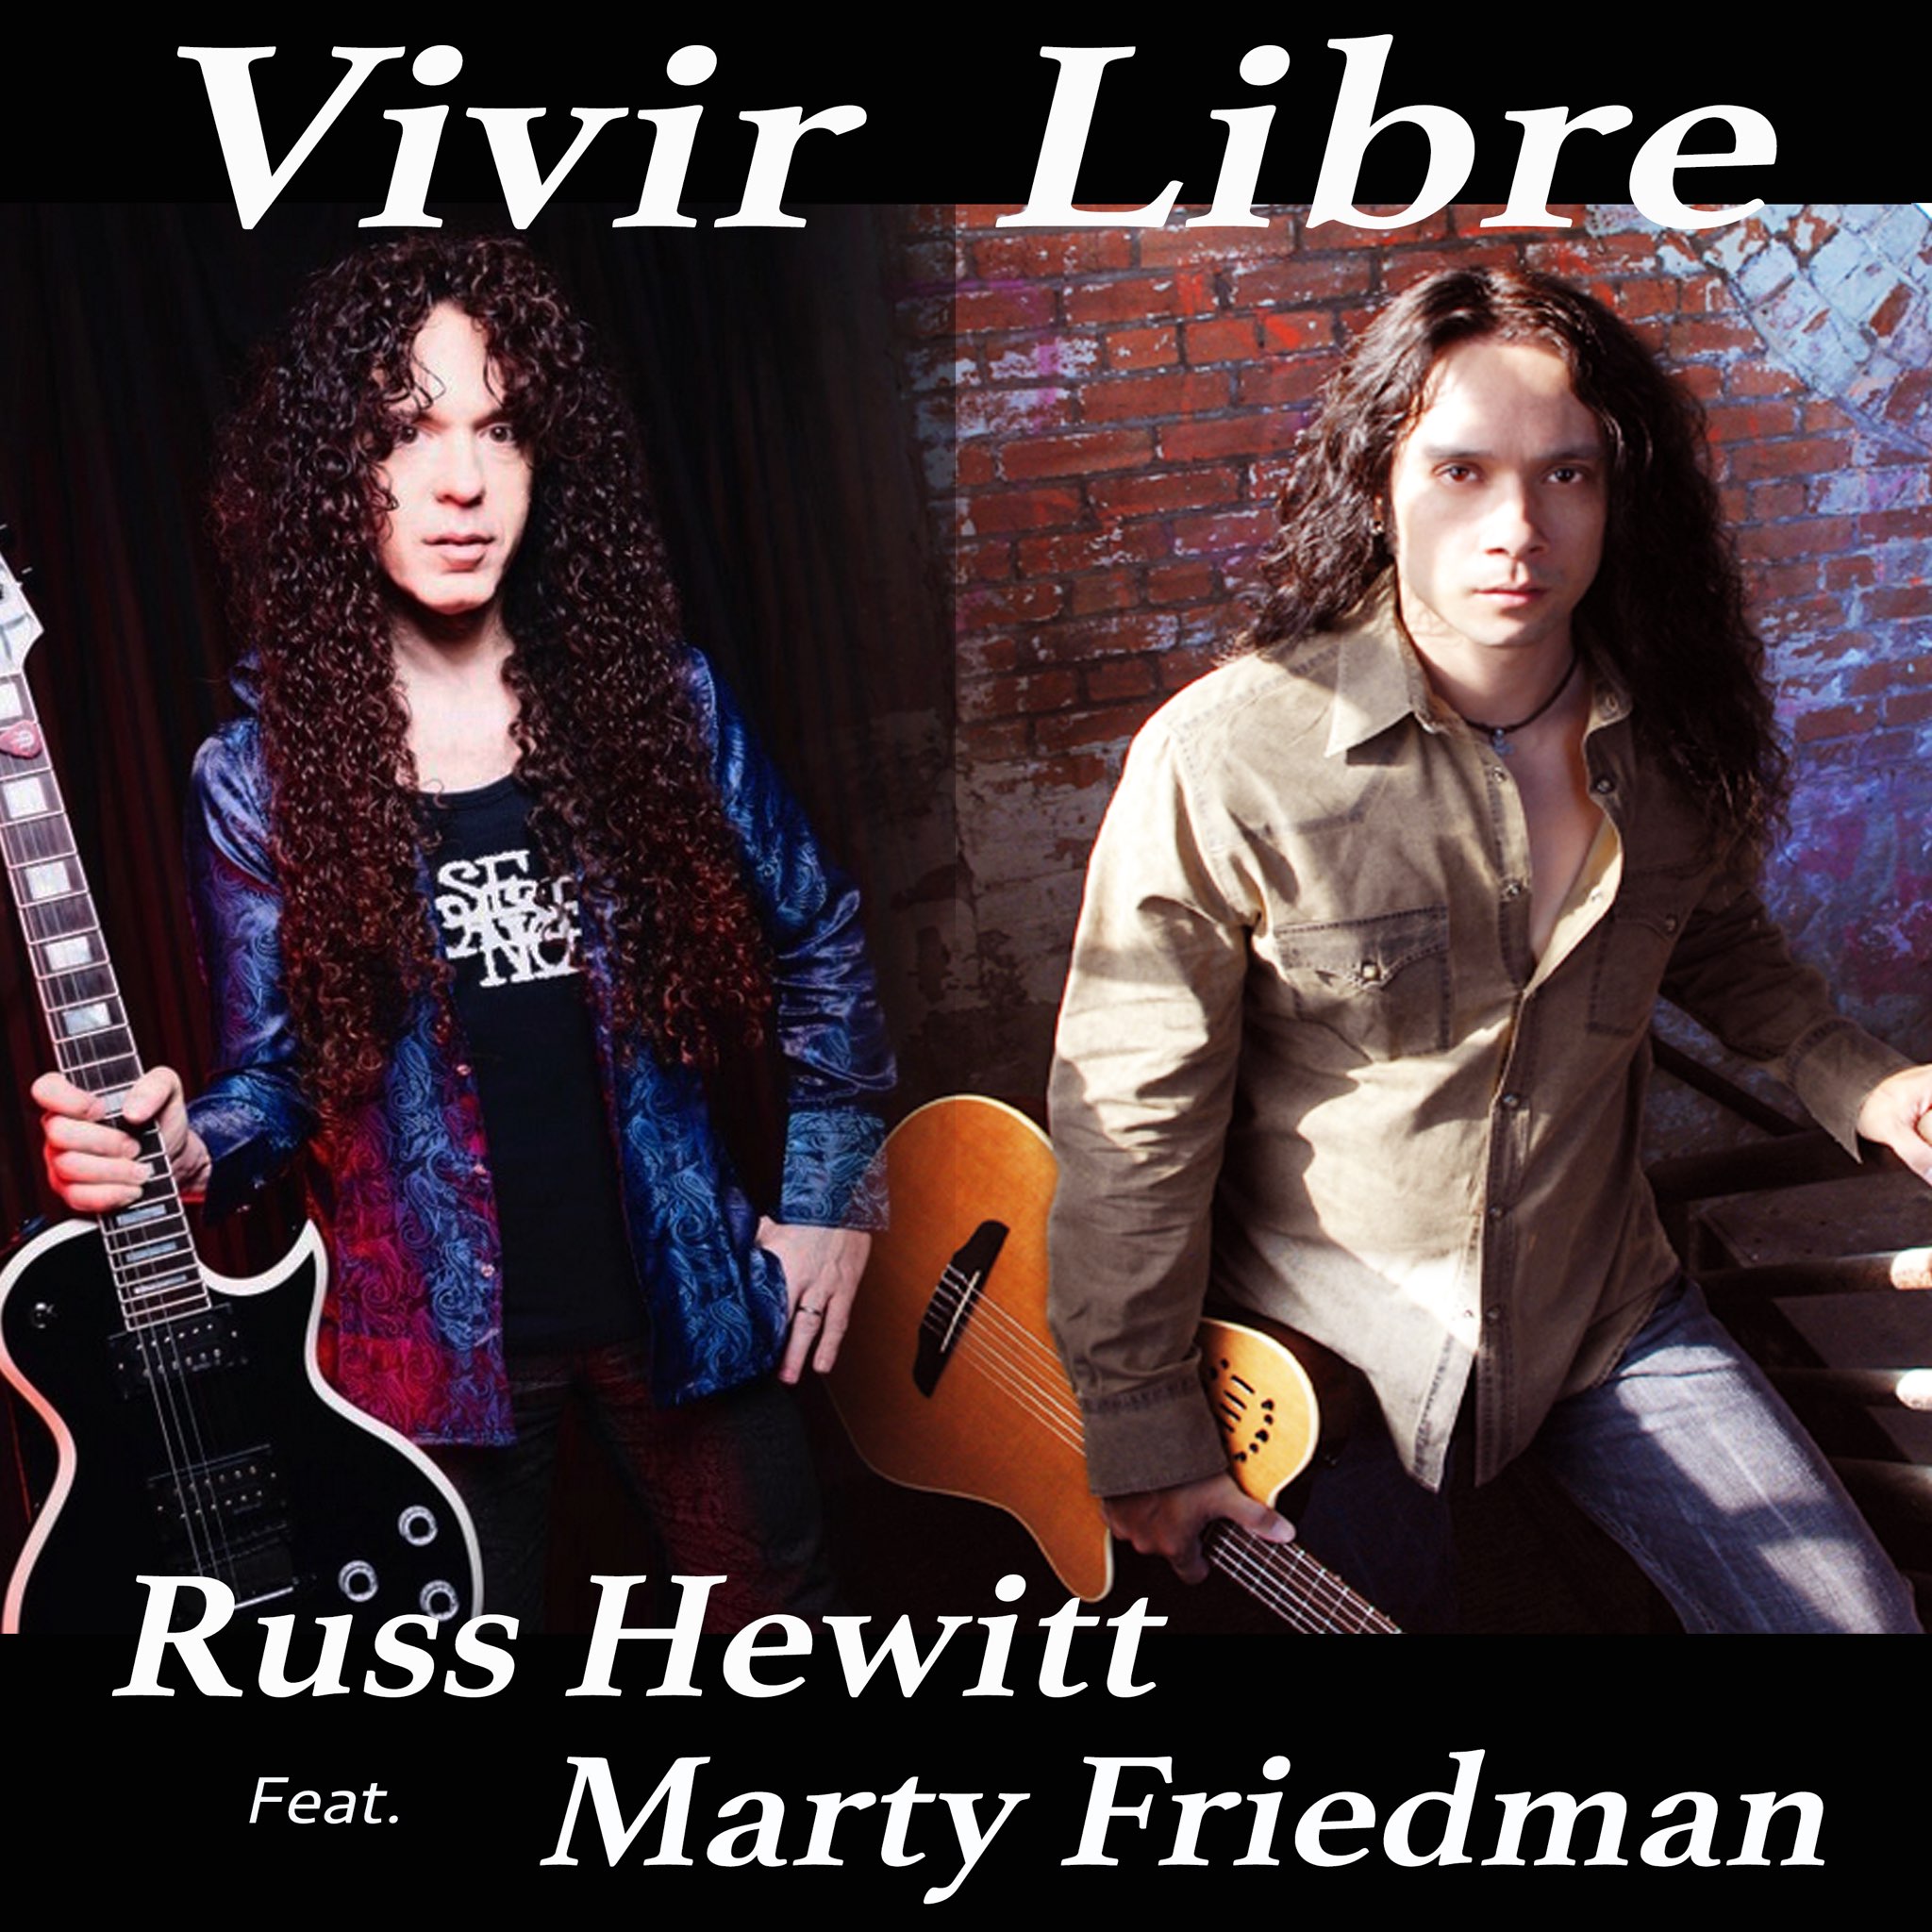 New single and video VIVIR LIBRE feat. Marty Friedman